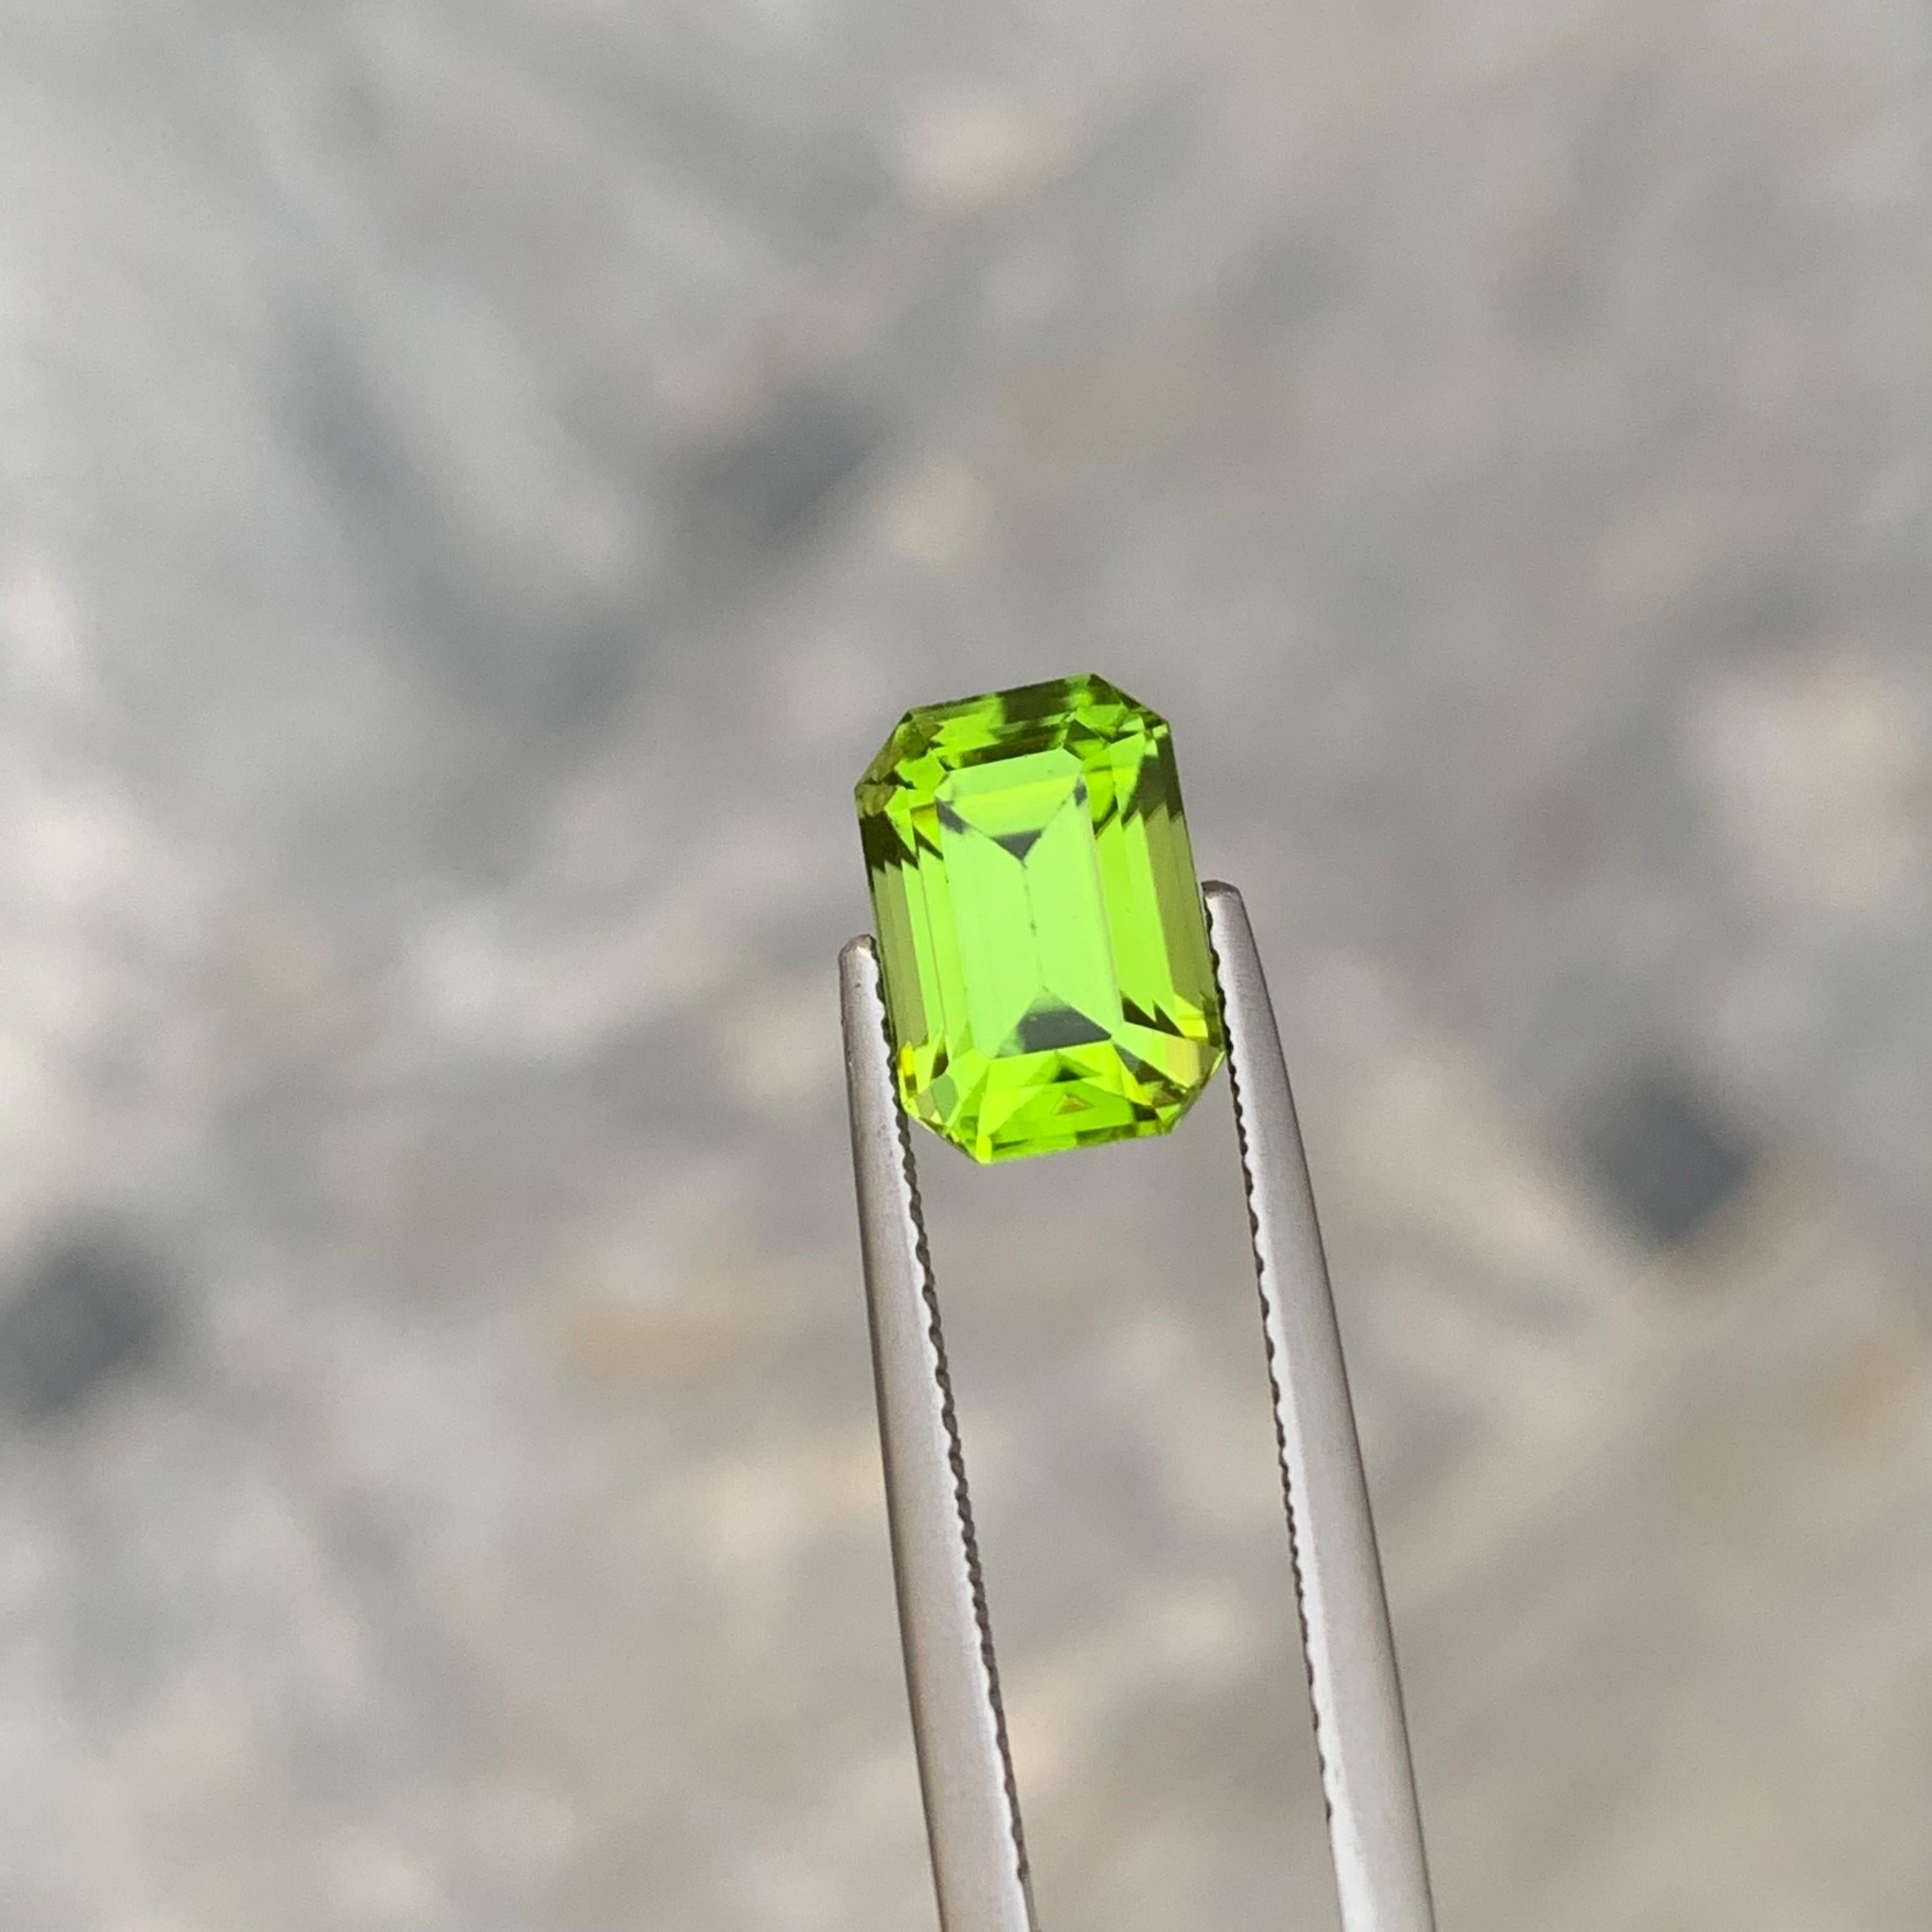 Gemstone Type : Peridot
Weight : 3.30 Carats
Dimensions : 9.6x6.7x5.8 mm
Origin : Suppat Valley Pakistan
Clarity : Eye Clean
Certificate: On Demand
Color: Green
It helps cure diseases related to lungs, breasts, intestinal tract, spleen and lymph. It